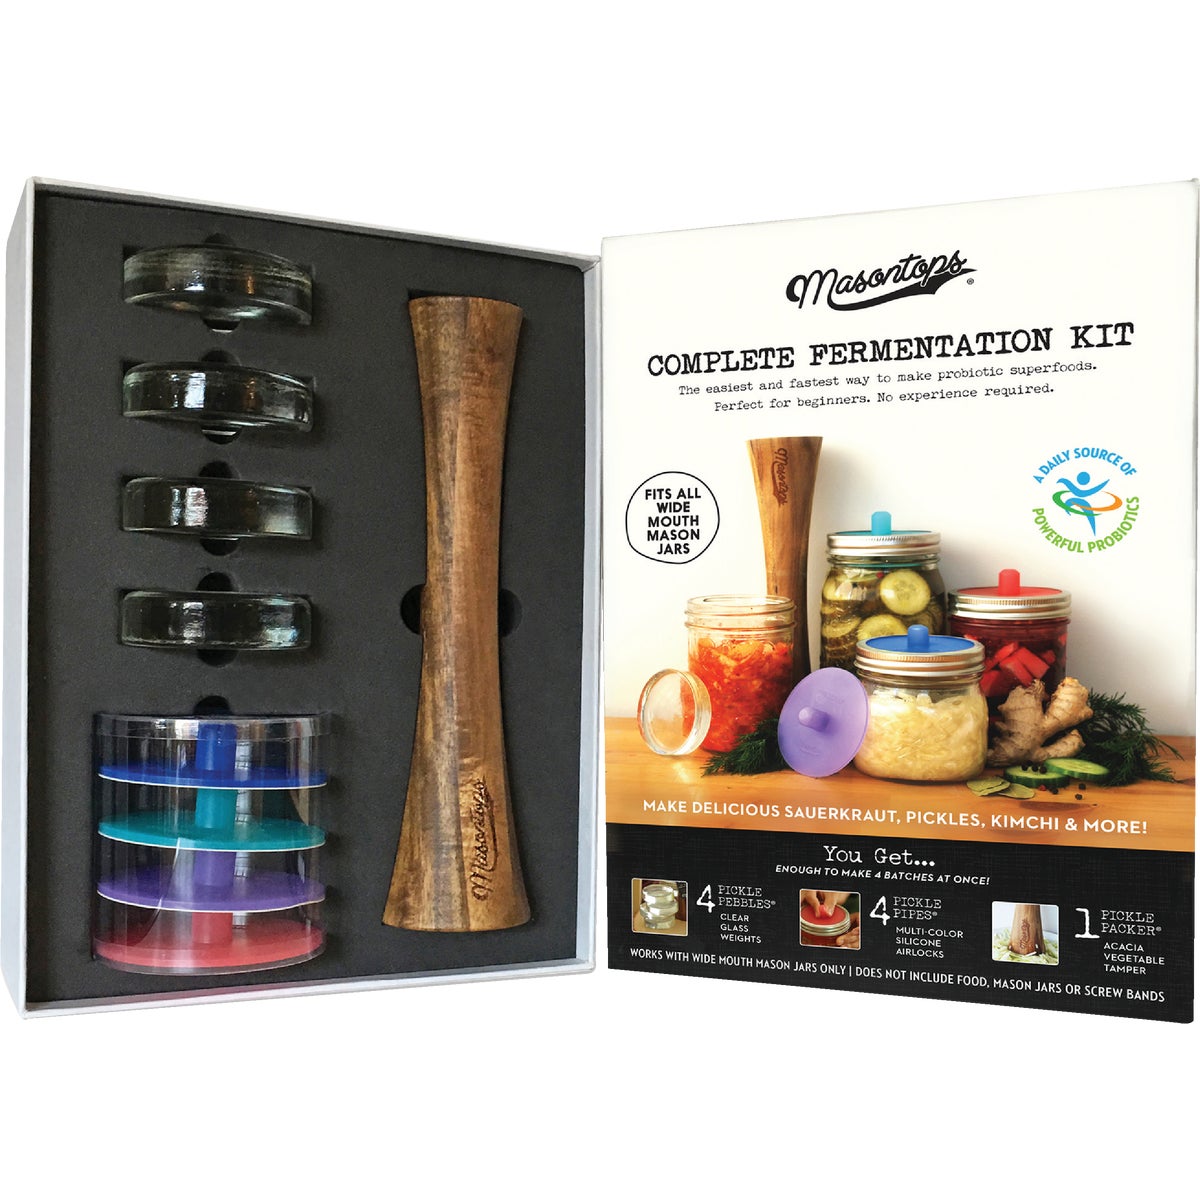 Item 602820, Masontops fermentation kit makes fermenting your own vegetables quick and 